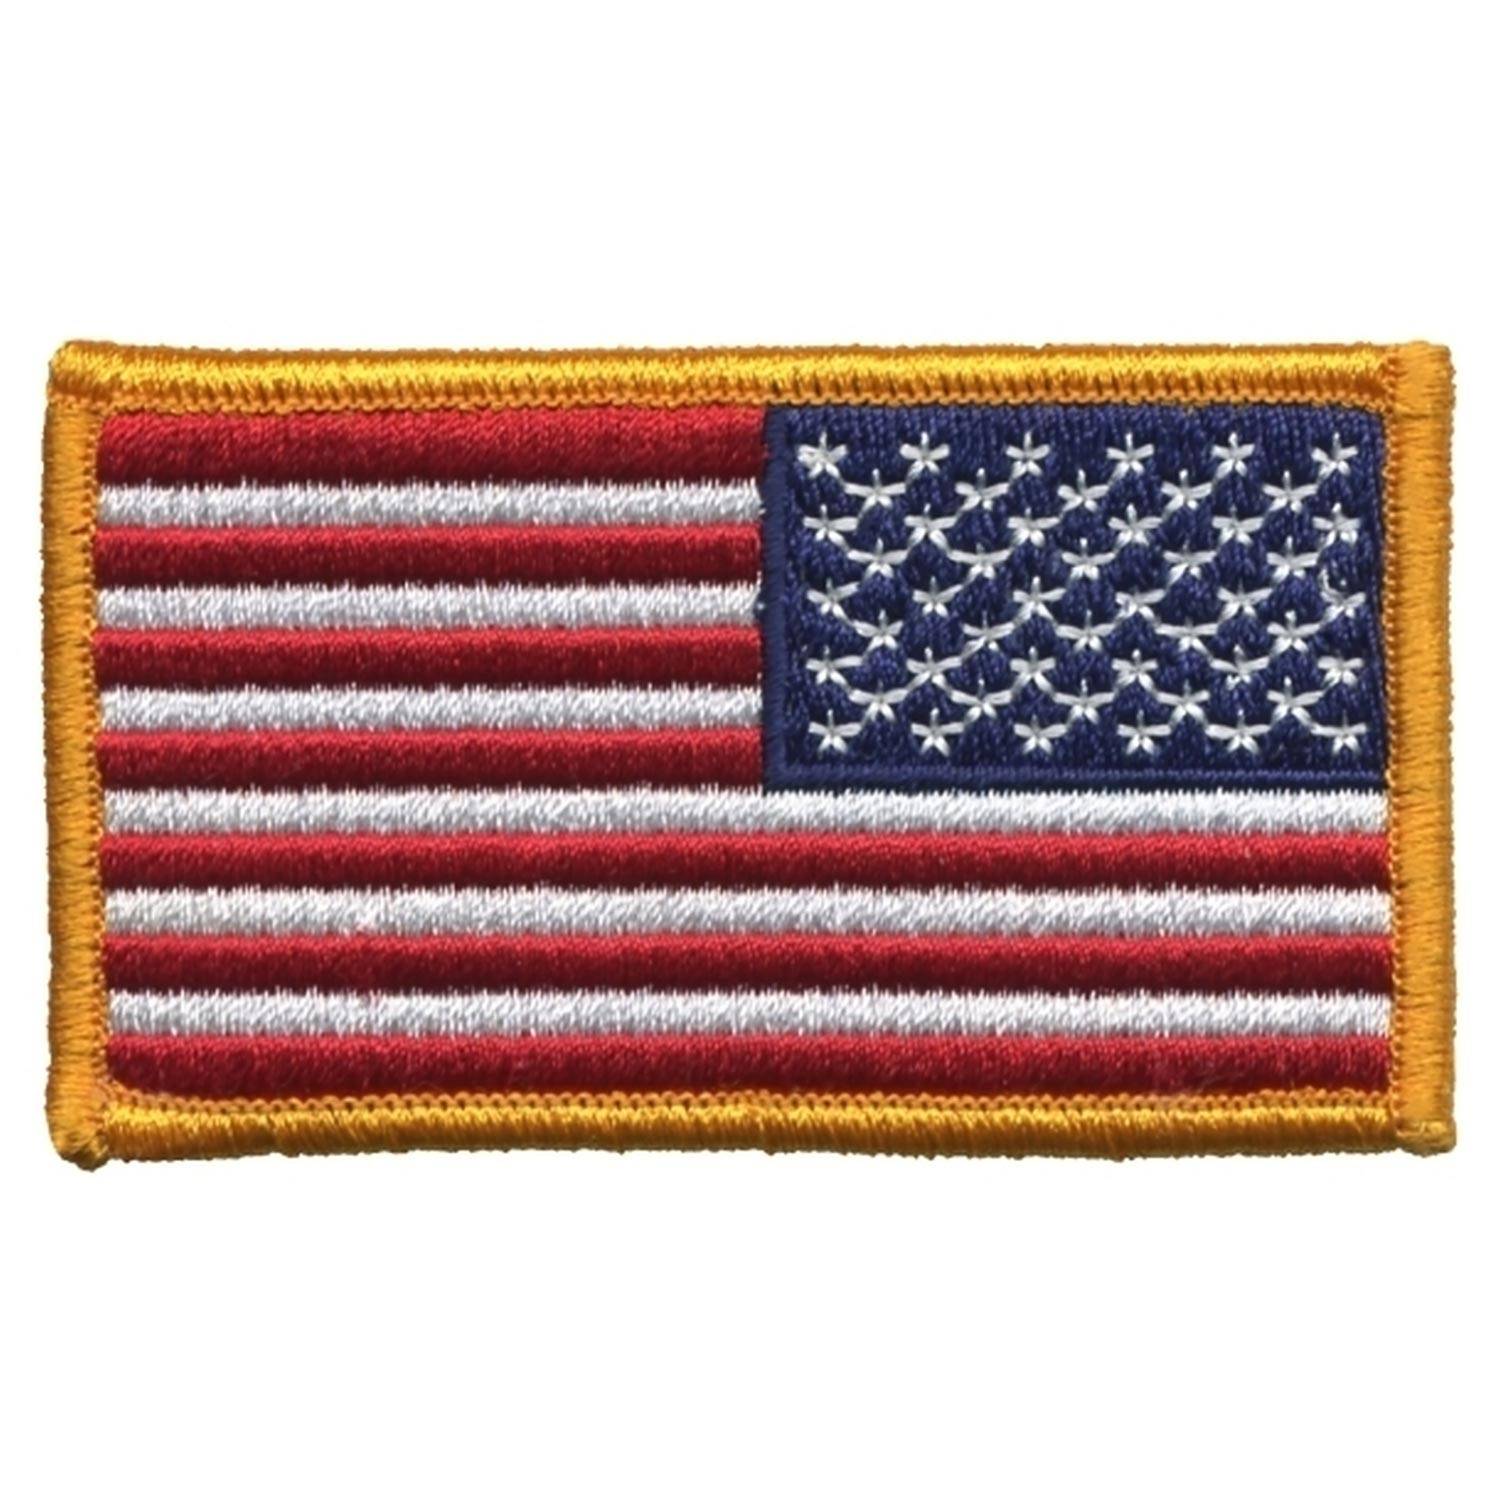 US Army Patch - Full Color